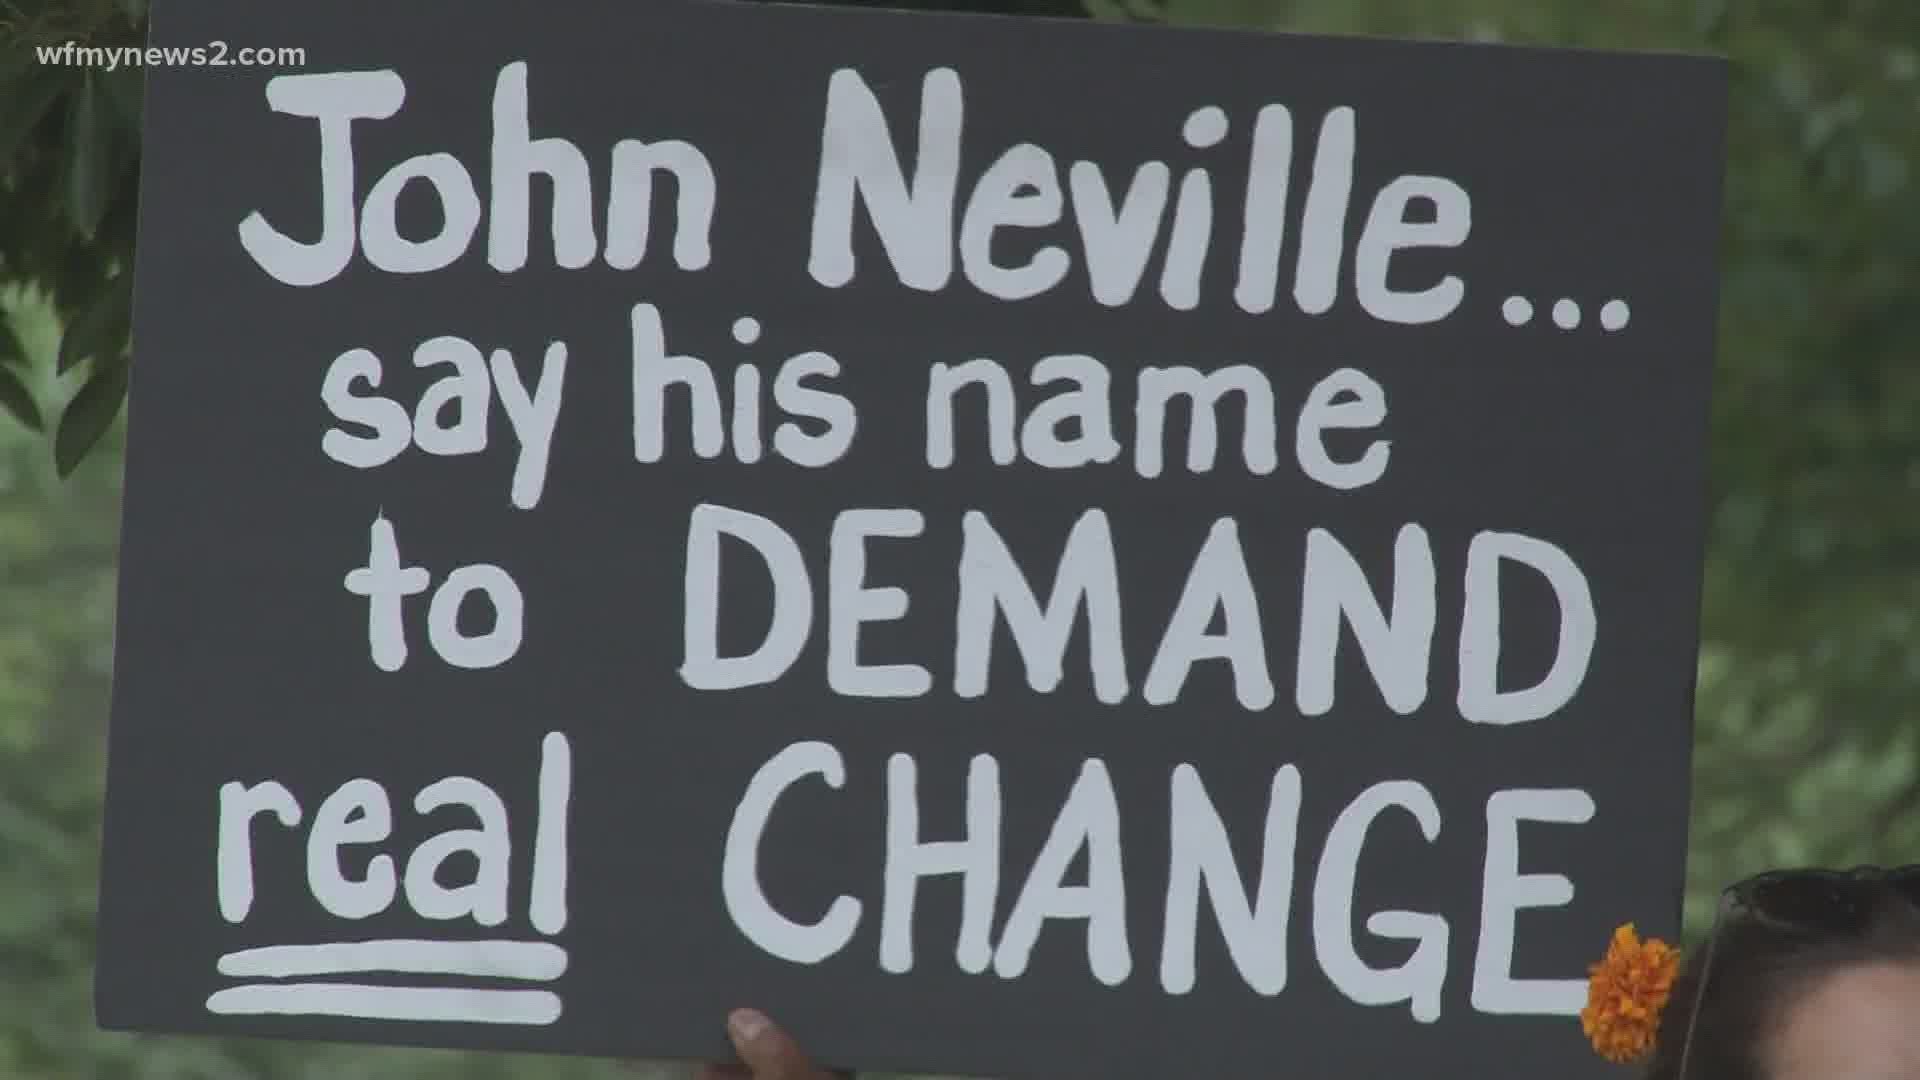 After videos showing John Neville being restrained in Forsyth County Detention Center were released, people gathered to protest and march in Winston-Salem.